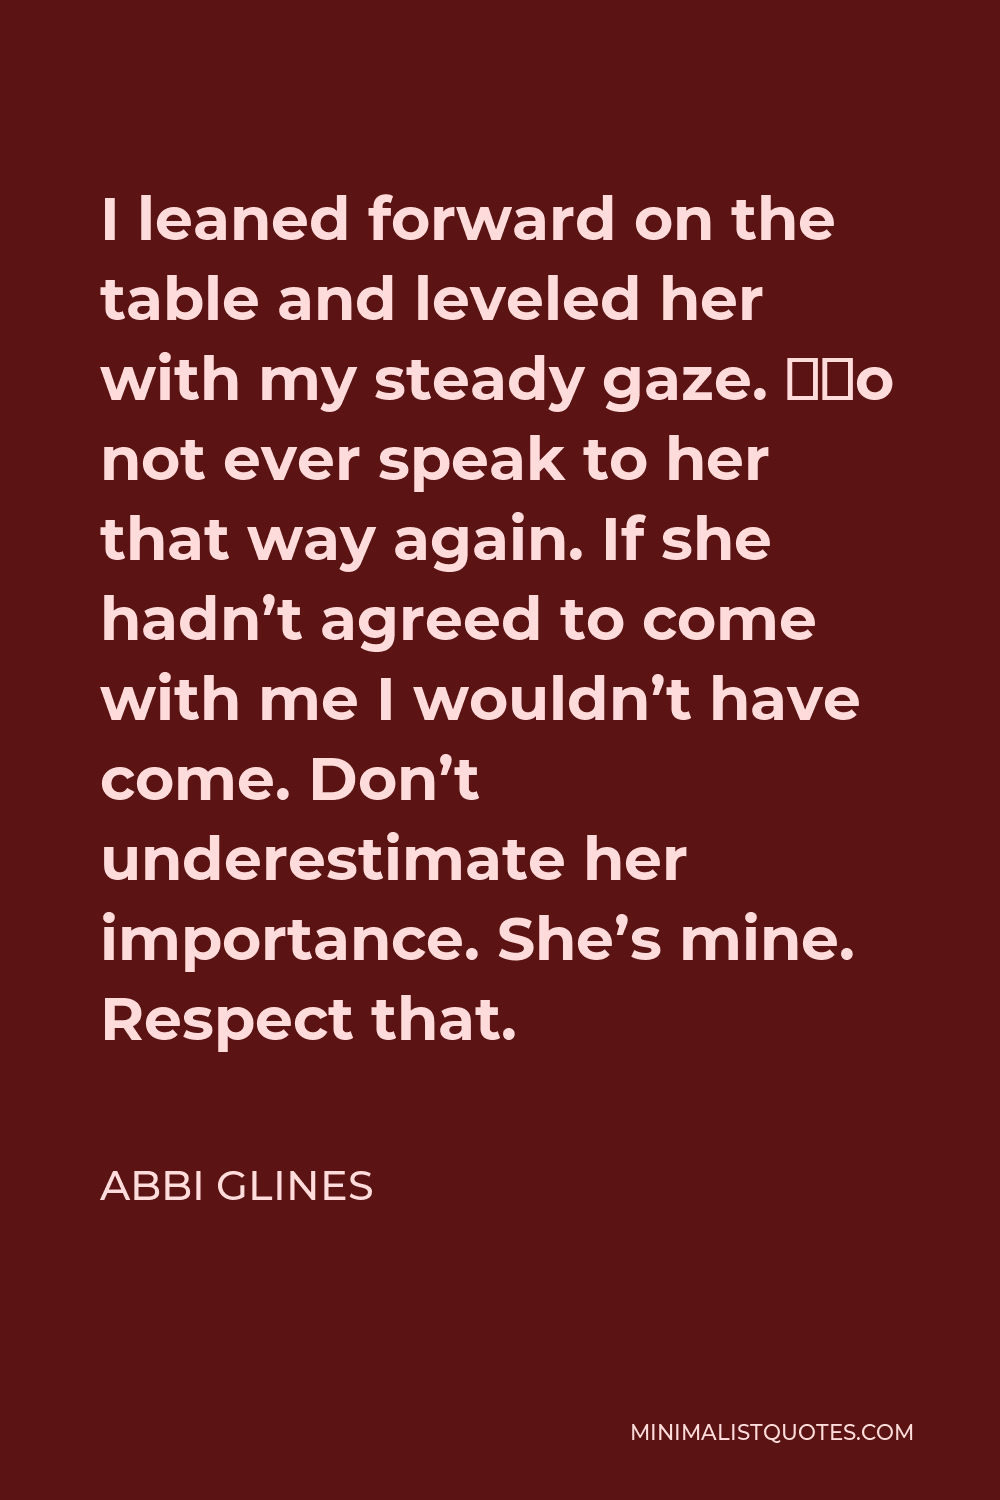 Abbi Glines Quote - I leaned forward on the table and leveled her with my steady gaze. “Do not ever speak to her that way again. If she hadn’t agreed to come with me I wouldn’t have come. Don’t underestimate her importance. She’s mine. Respect that.